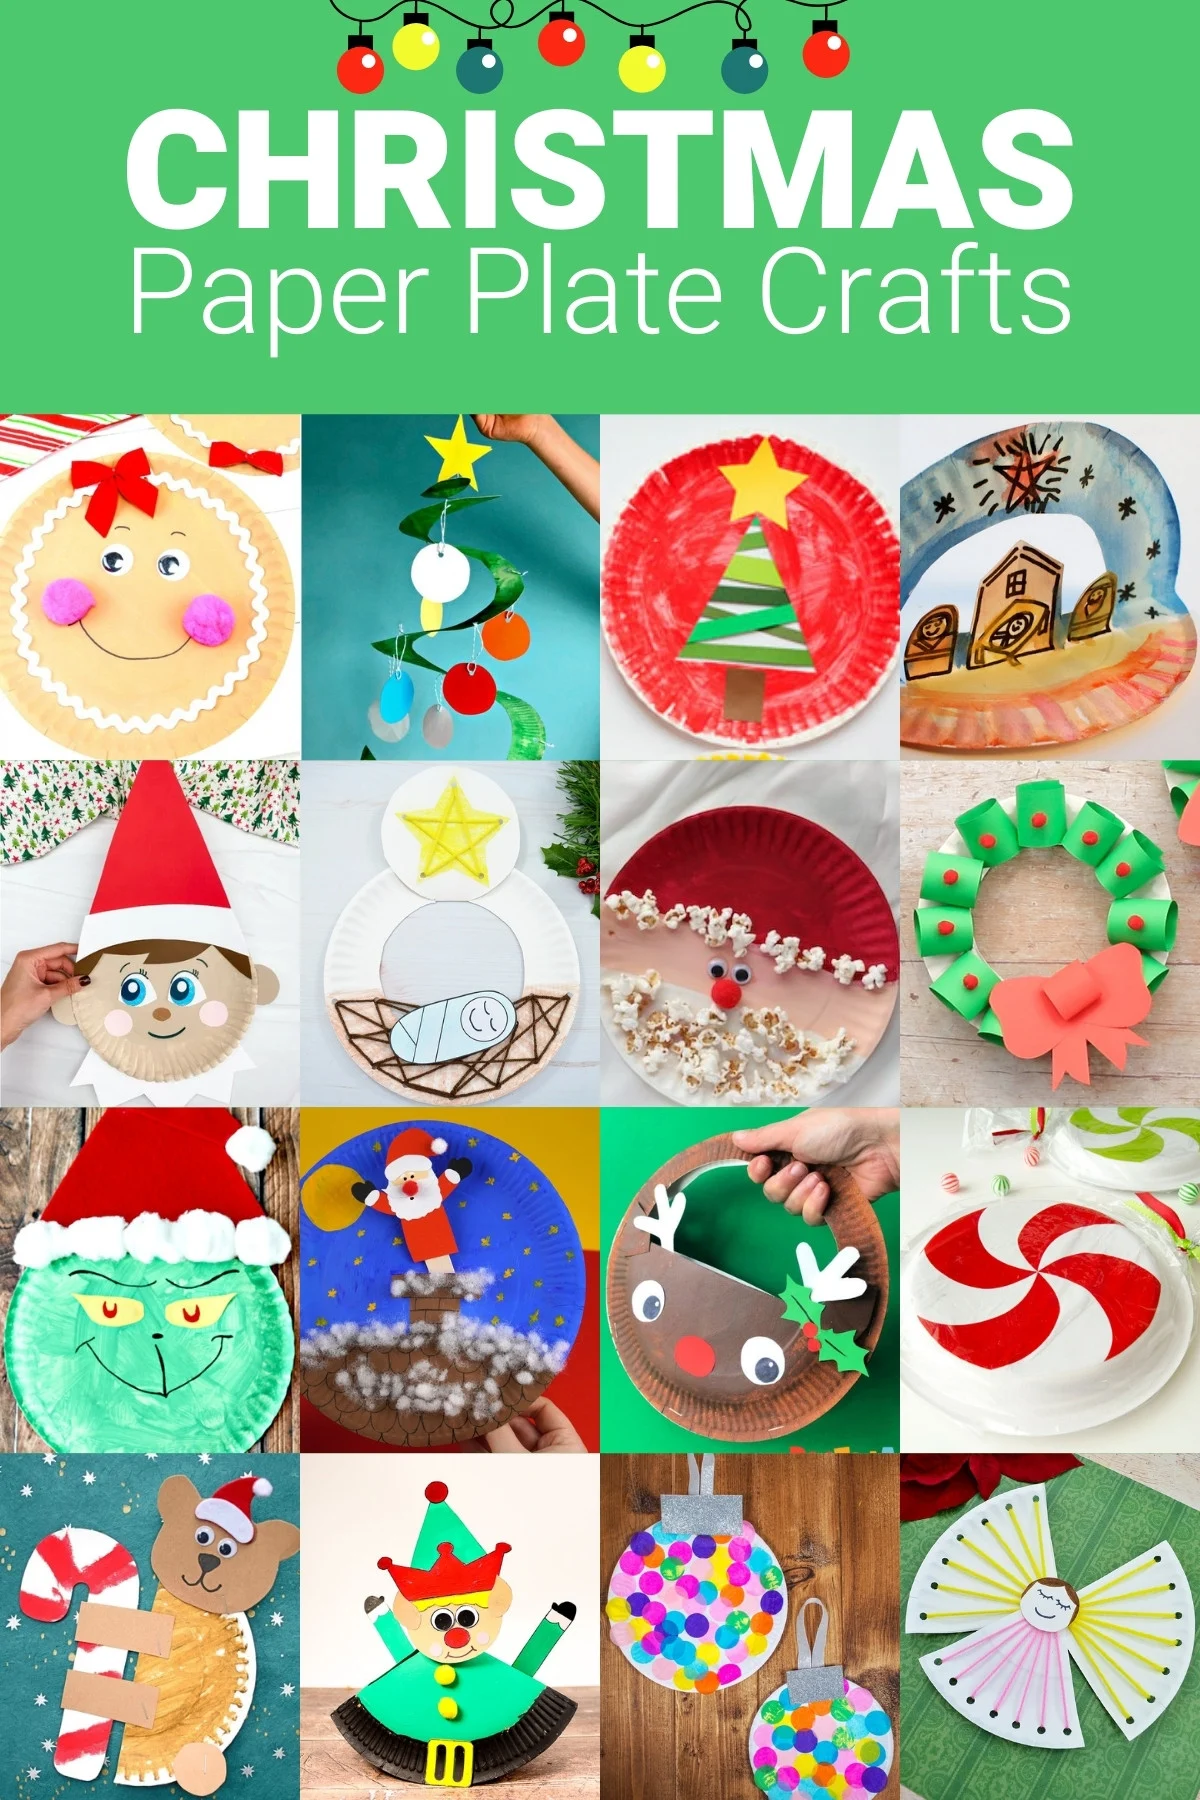  READY 2 LEARN Christmas Crafts - Create Your Own